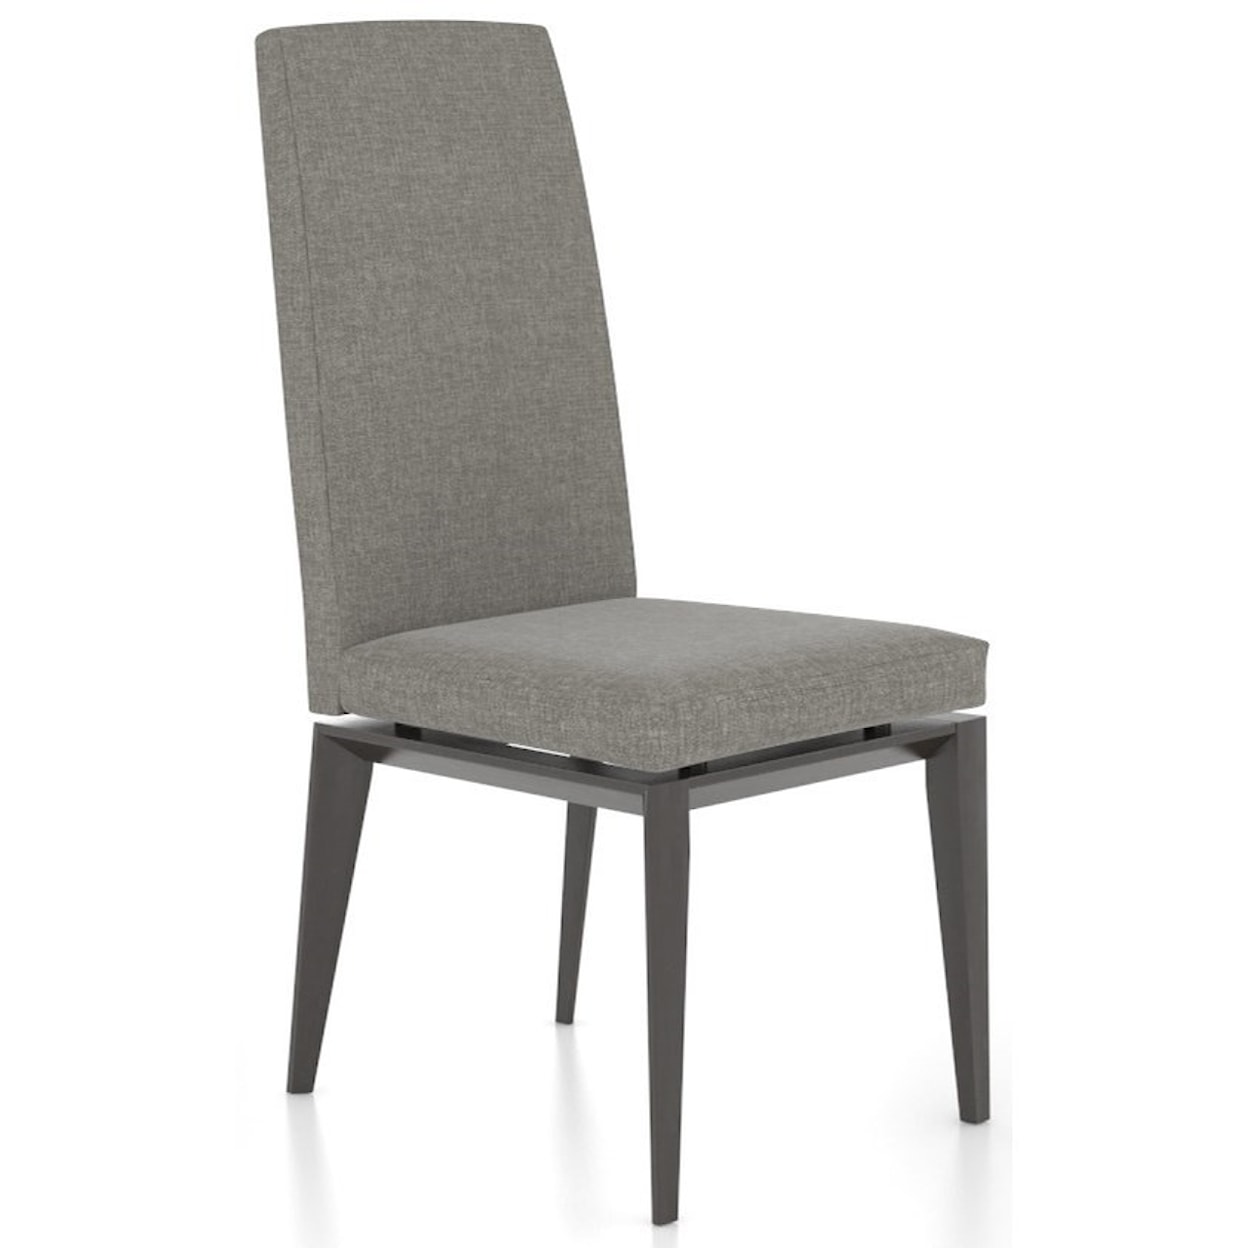 Canadel Downtown Tall-Back Side Chair